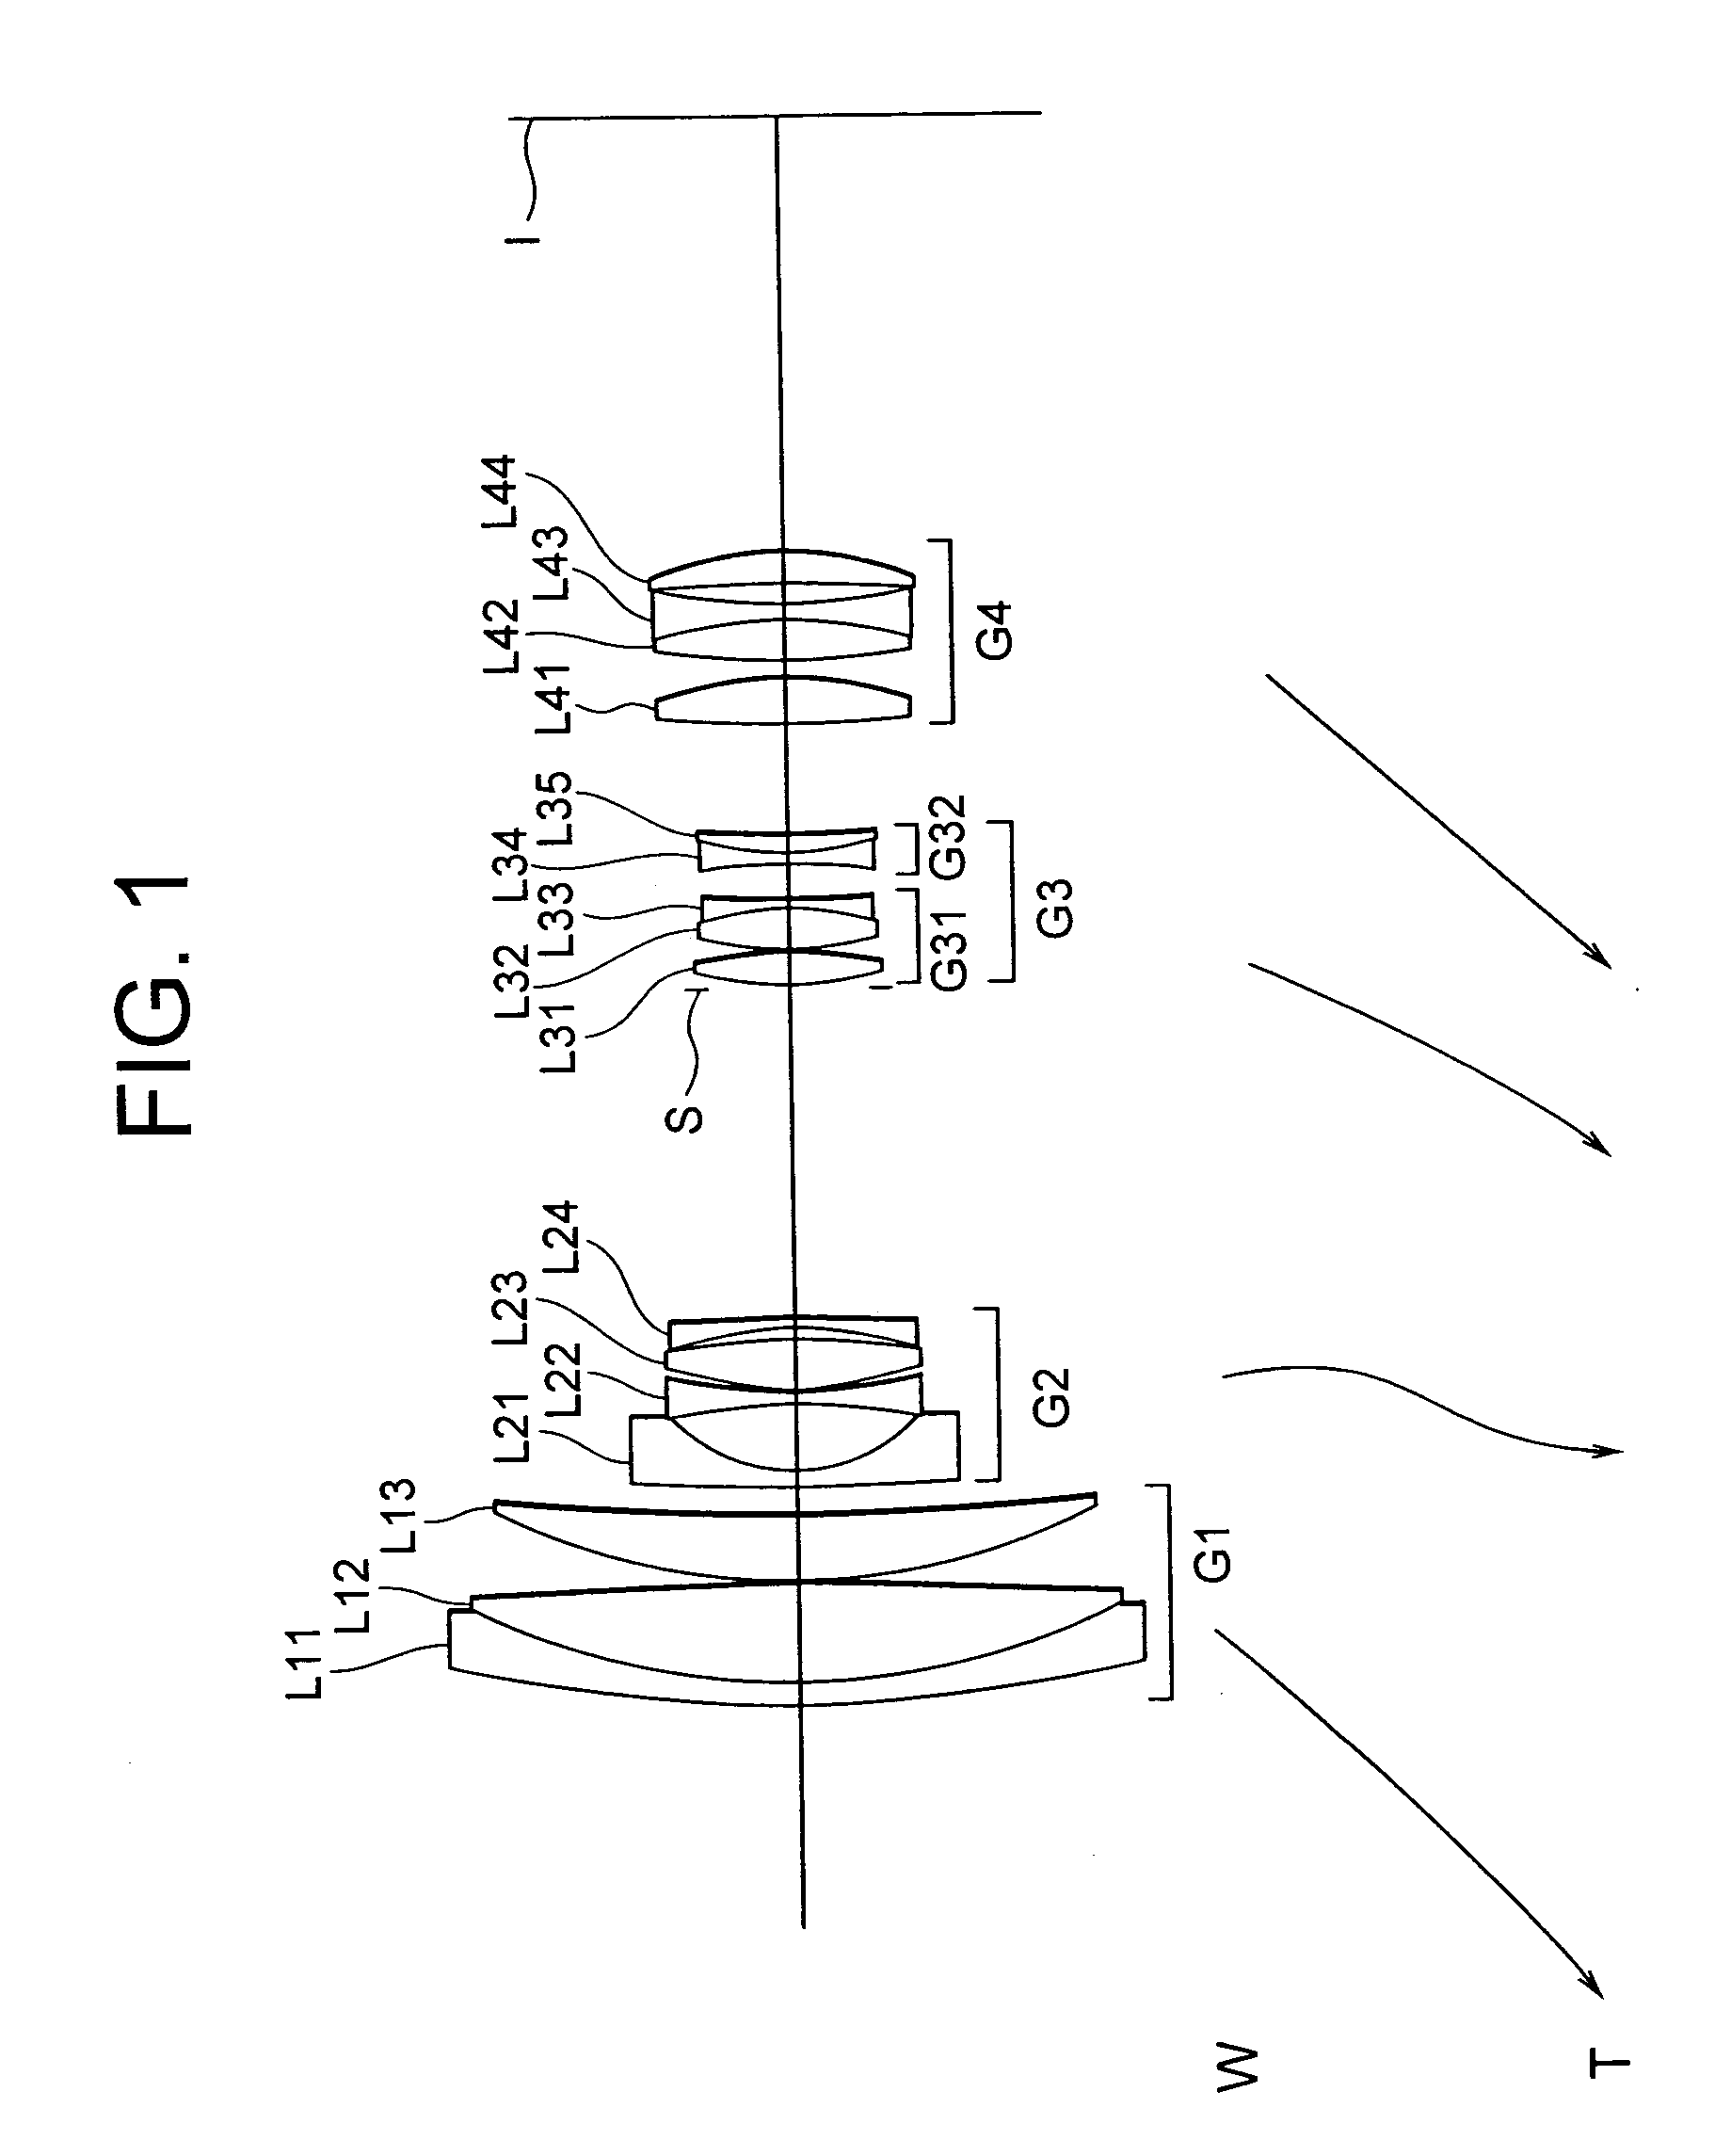 Zoom lens system with vibration reduction